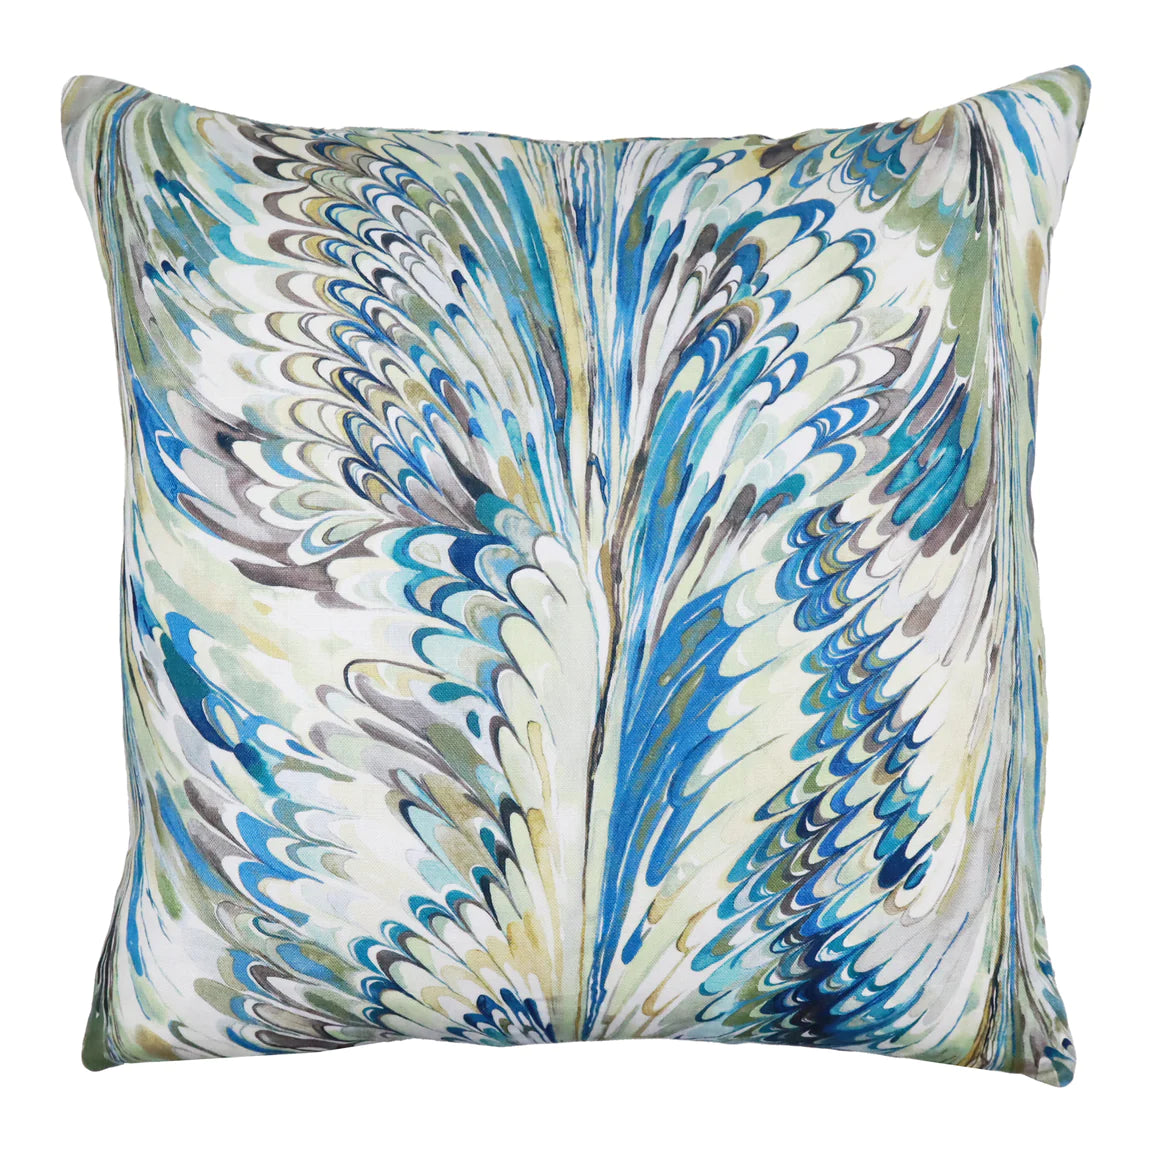 Everly Pillow